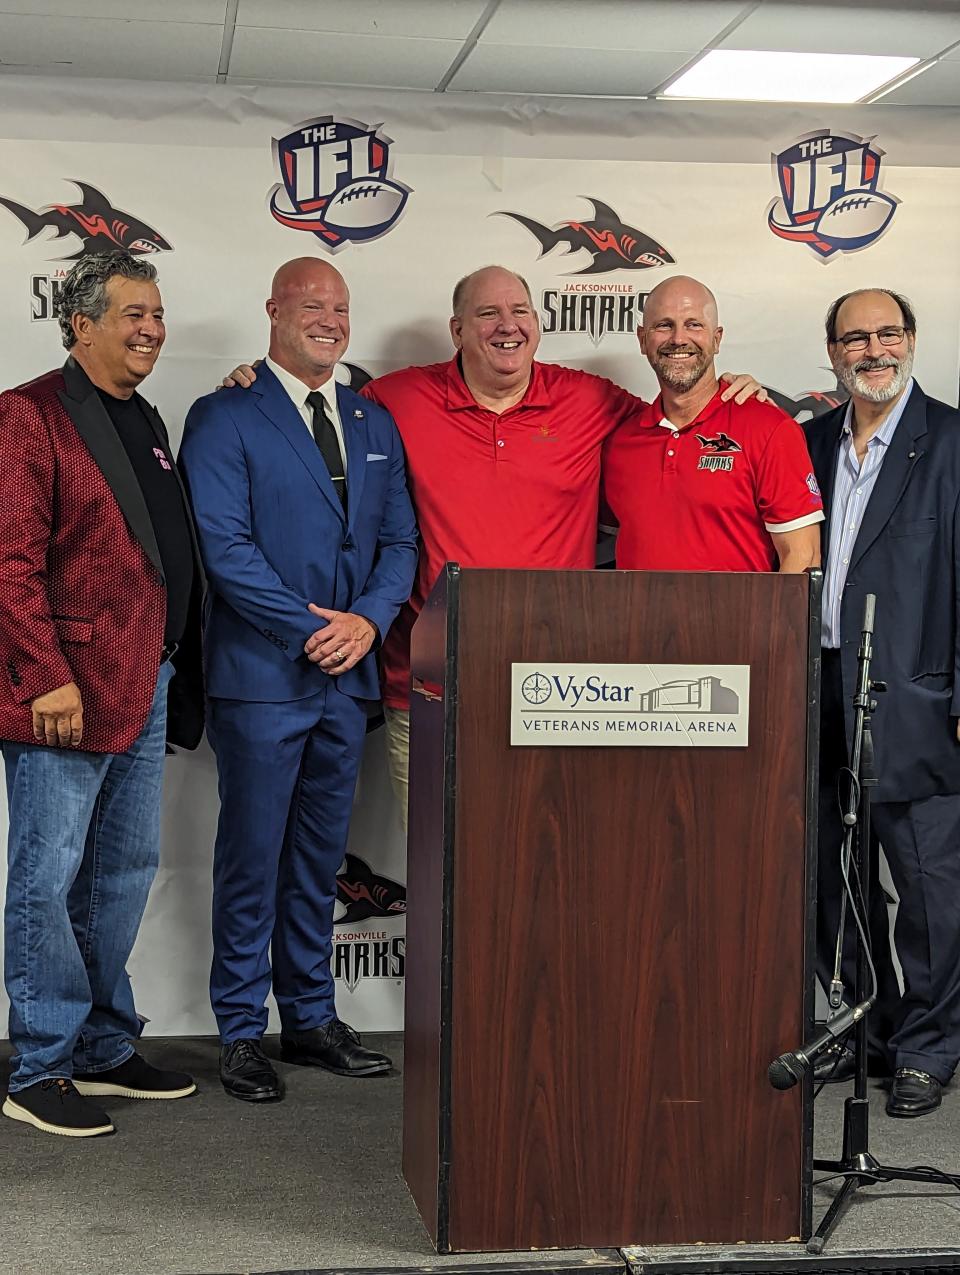 The Jacksonville Sharks joined the Indoor Football League at VyStar Veterans Memorial Arena on Tuesday.